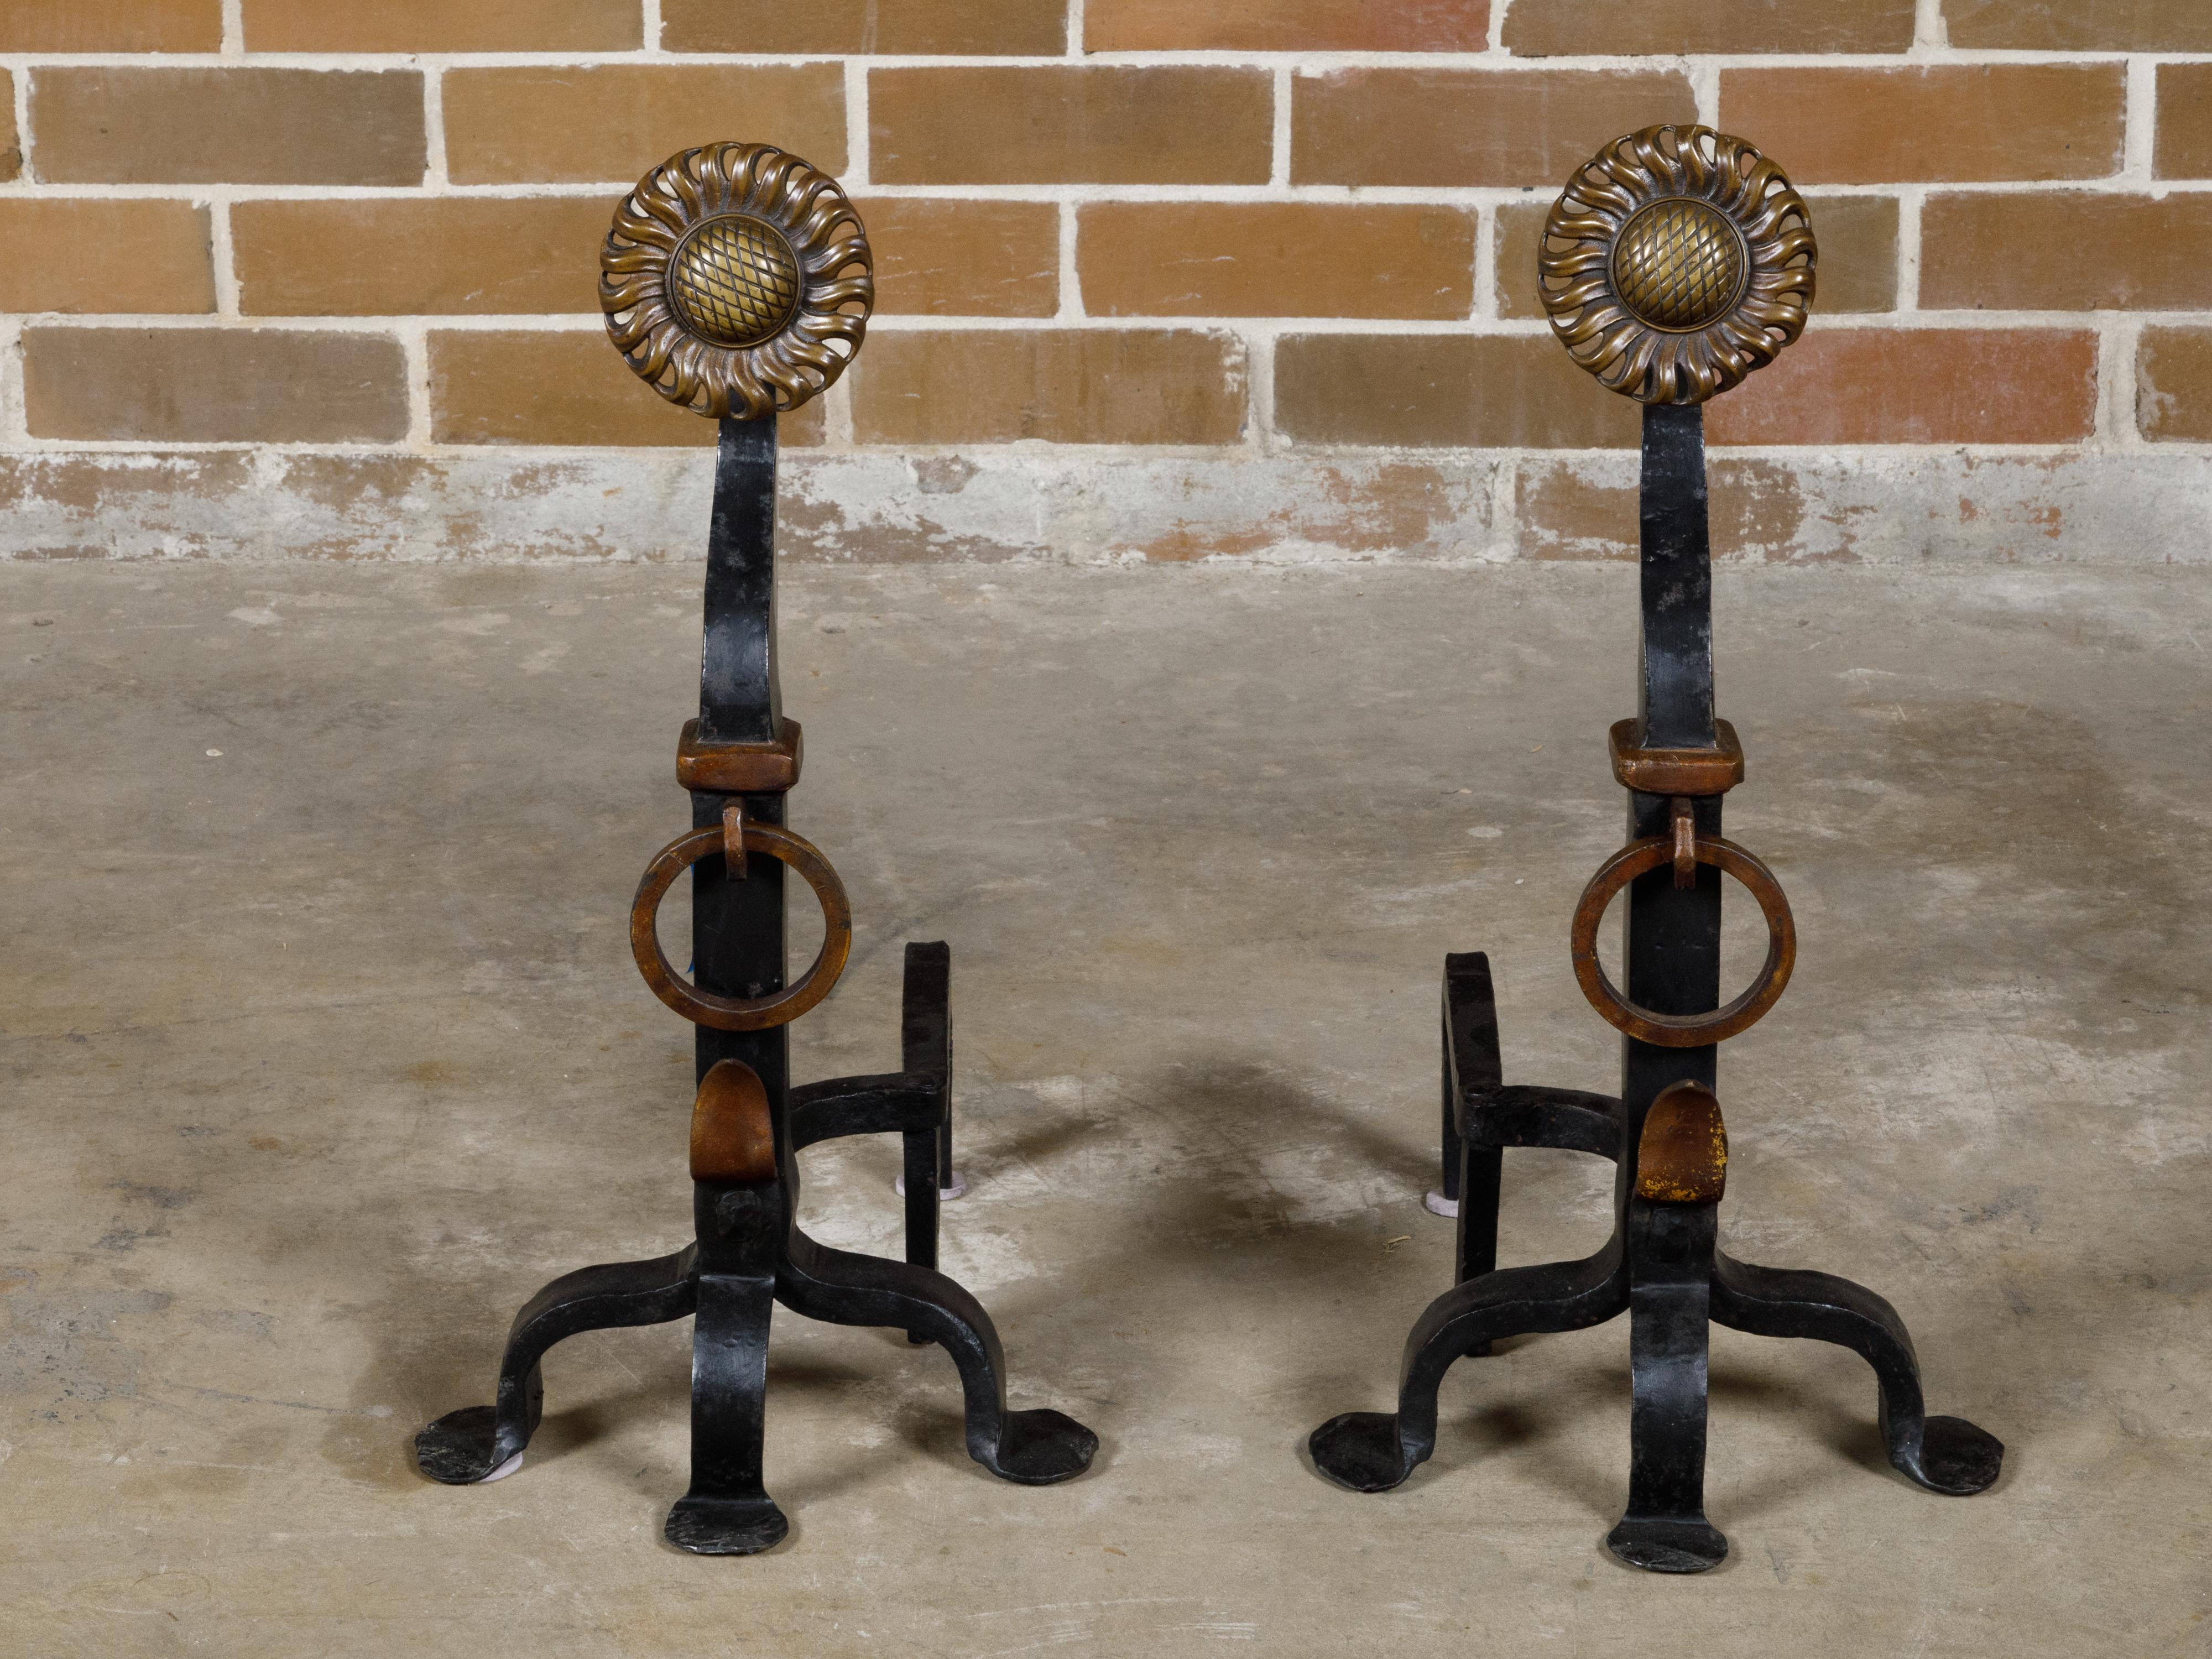 A pair of English Turn of the Century iron and brass sunflower andirons from circa 1900 with three scrolling legs. Embrace the charm and craftsmanship of yesteryears with this exquisite pair of English iron and brass andirons, adorned with sunflower